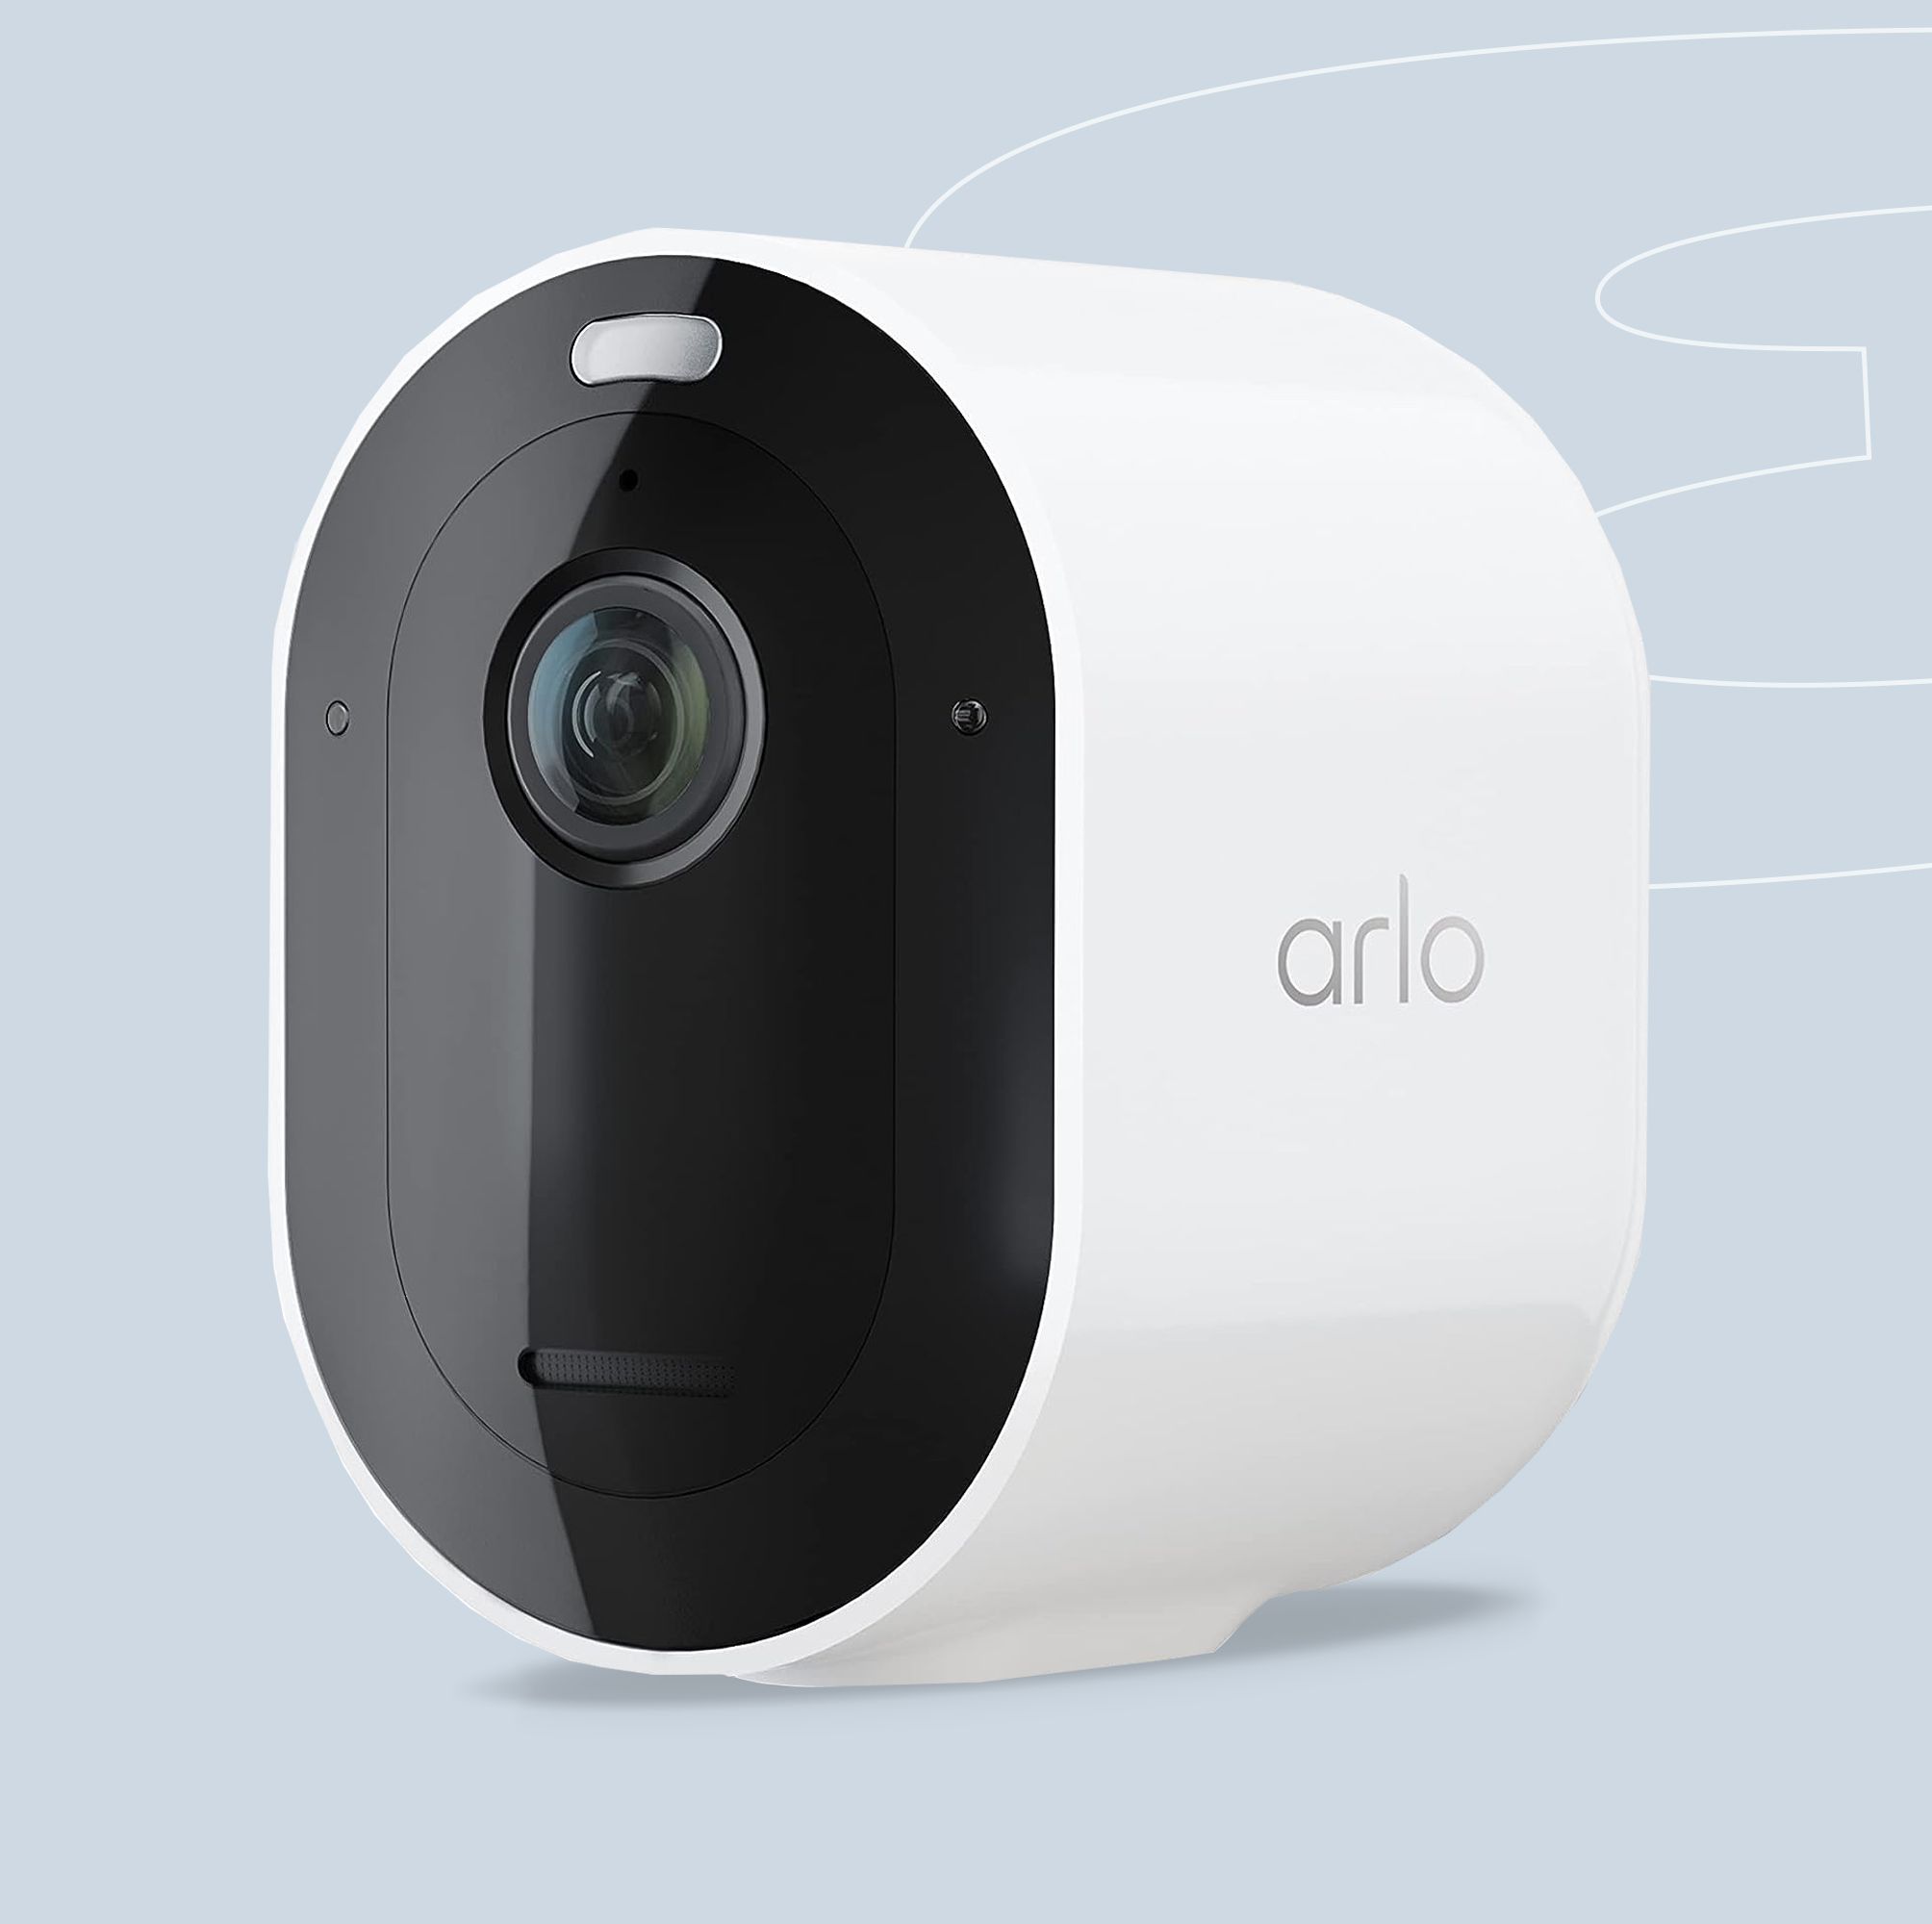 5 Home Security Cameras That Offer Peace Of Mind—No Matter Where You Are